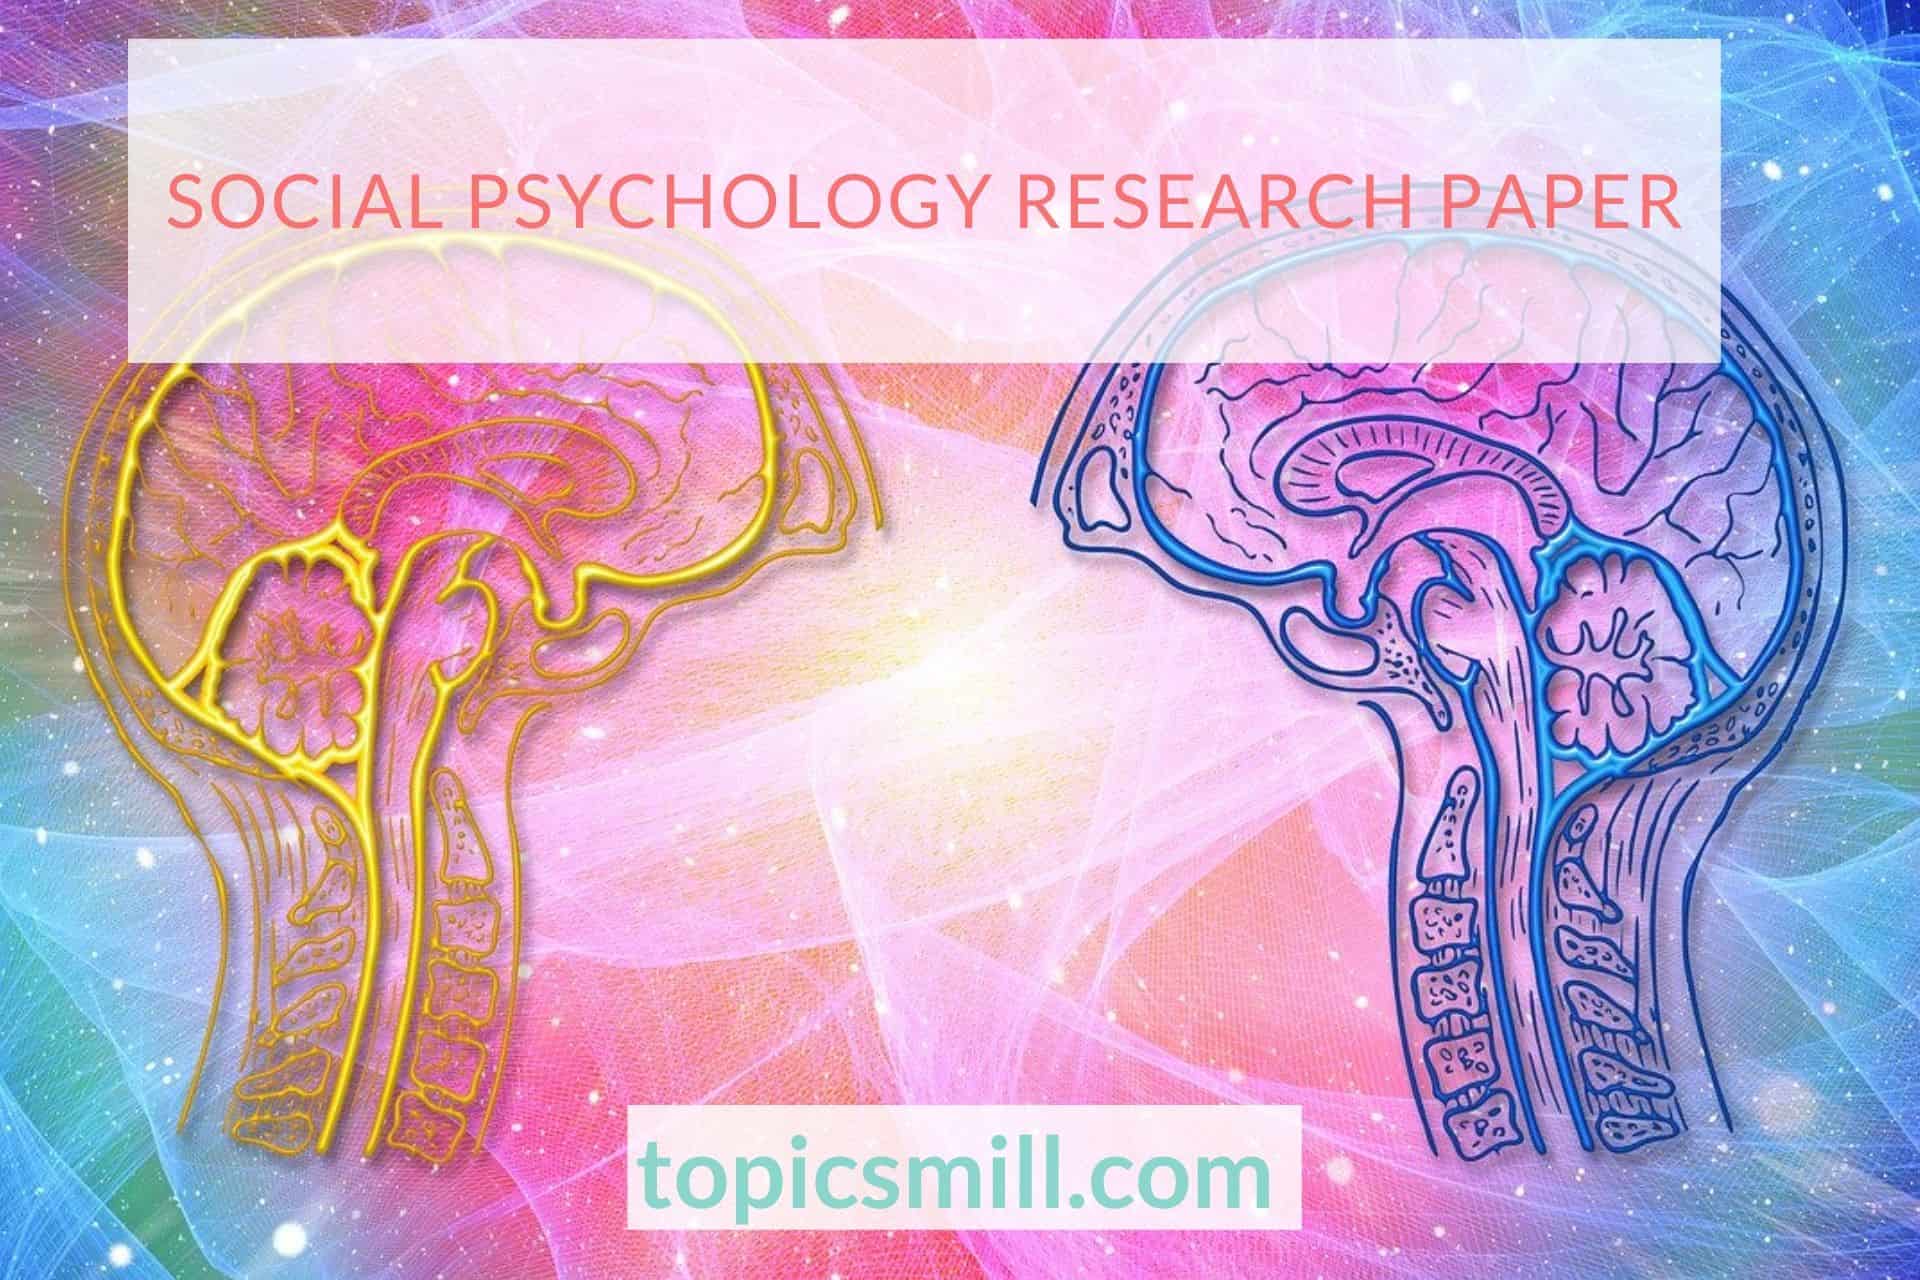 Research paper on social psychology